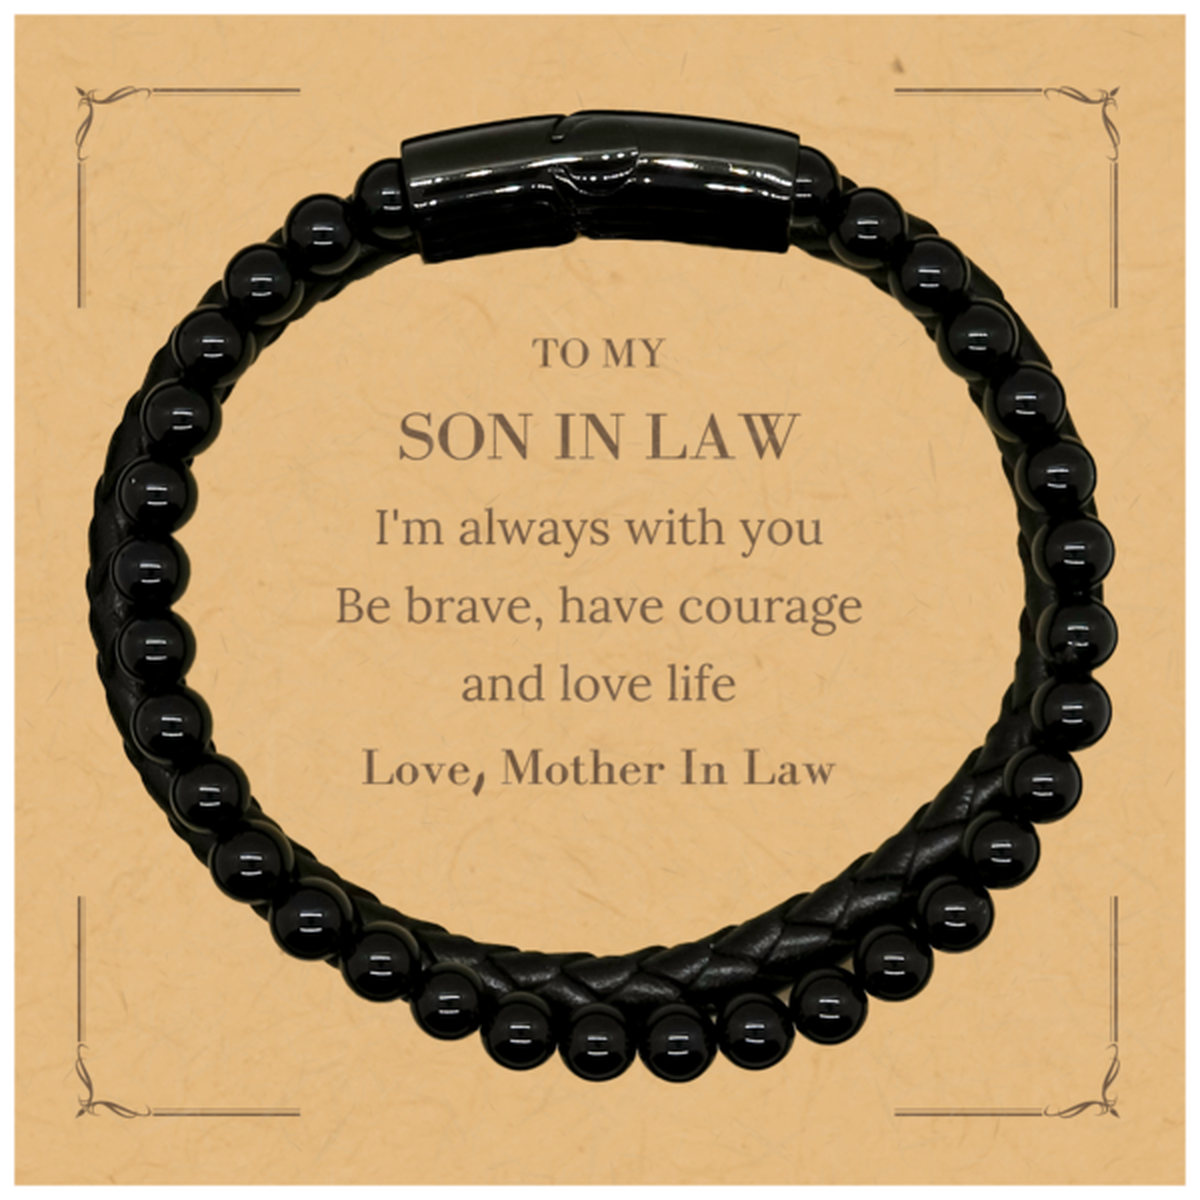 To My Son In Law Gifts from Mother In Law, Unique Stone Leather Bracelets Inspirational Christmas Birthday Graduation Gifts for Son In Law I'm always with you. Be brave, have courage and love life. Love, Mother In Law